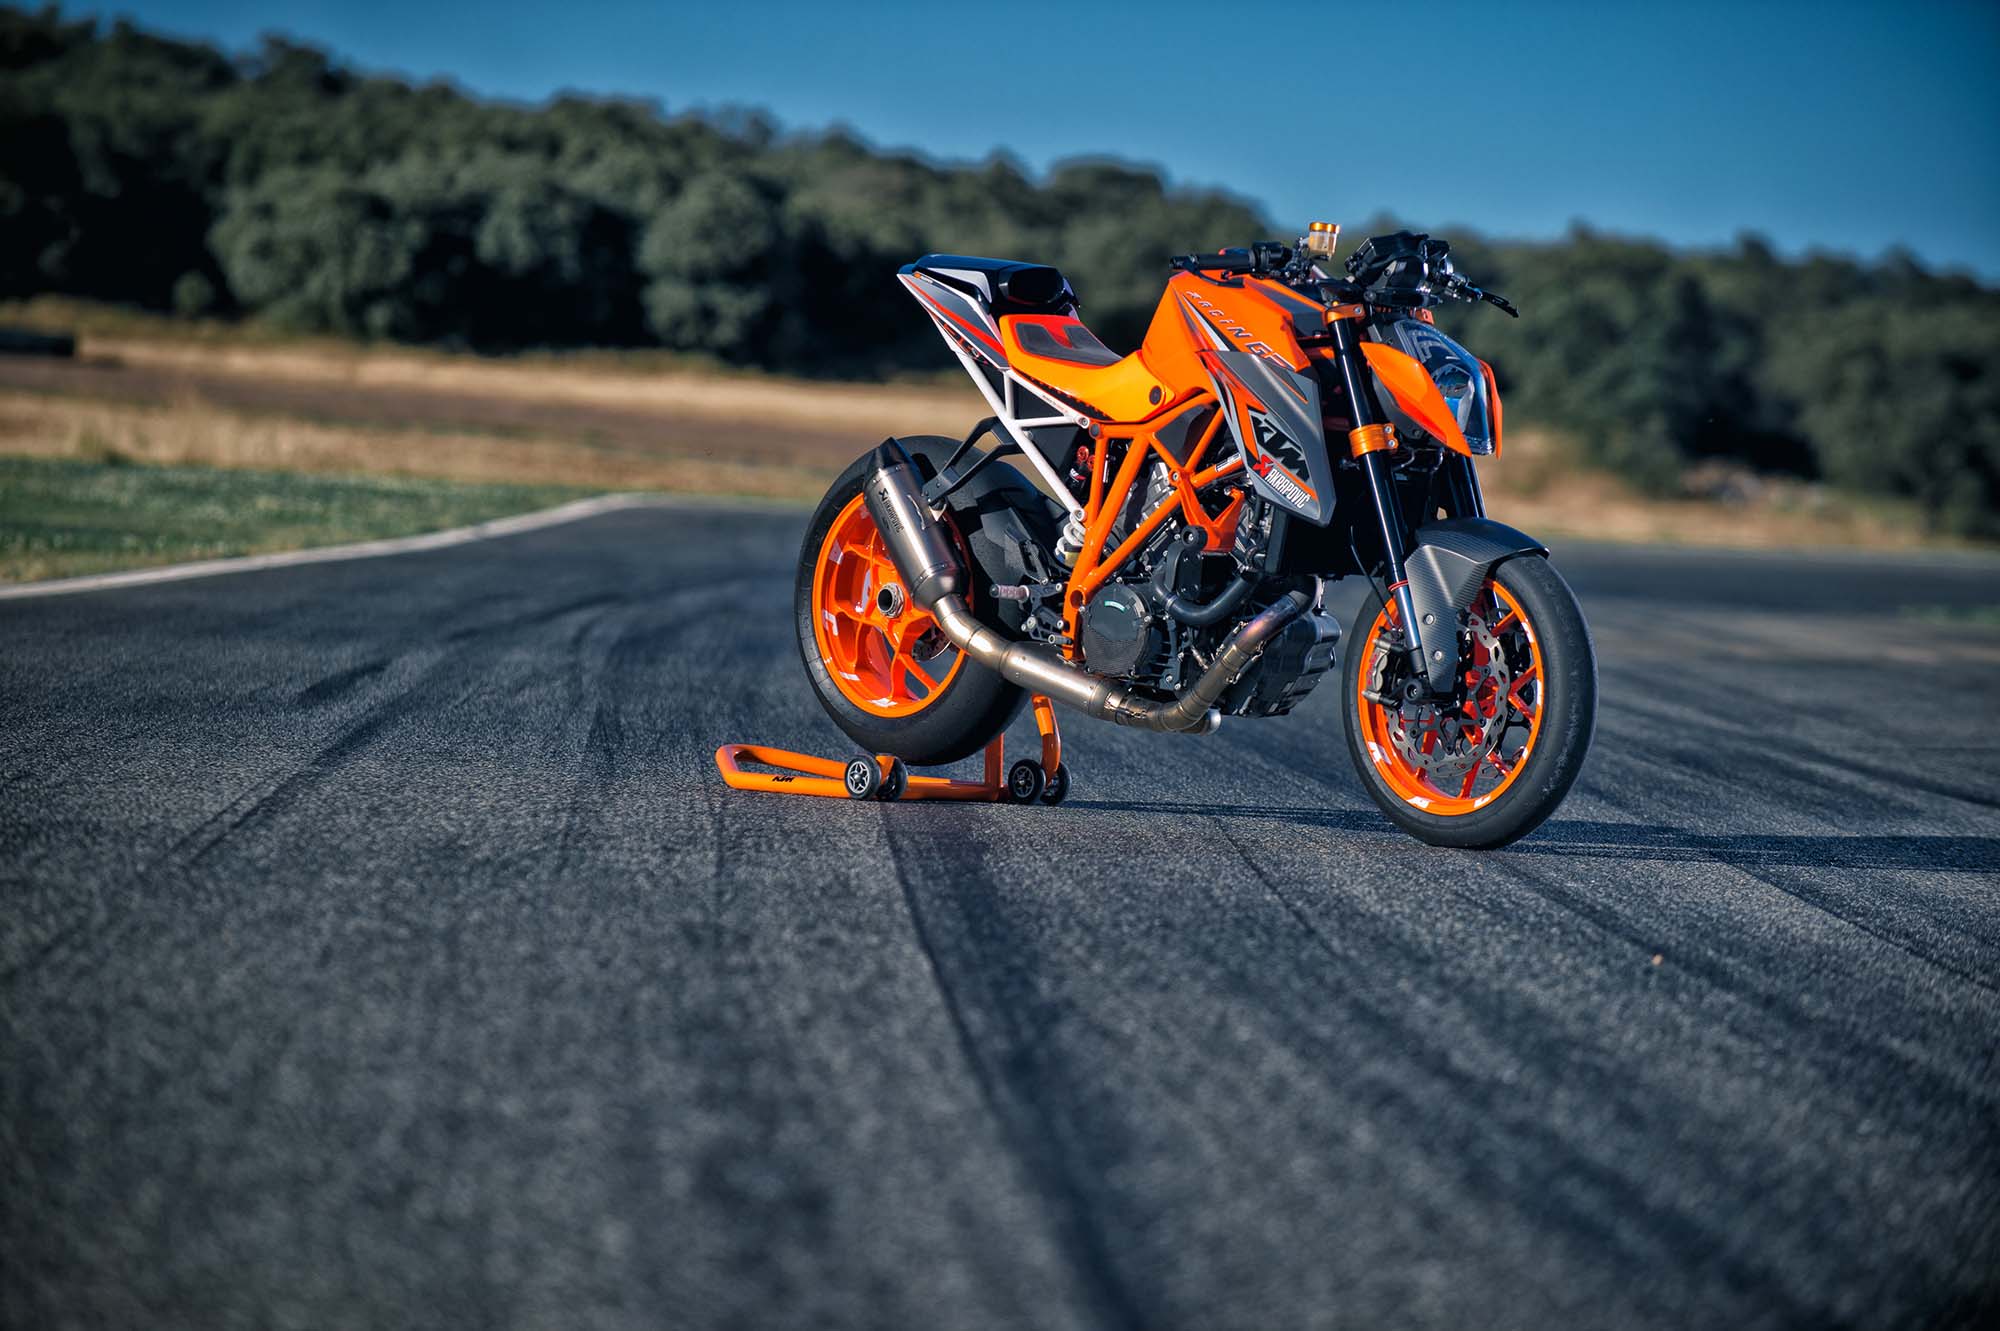 60+ KTM HD Wallpapers and Backgrounds